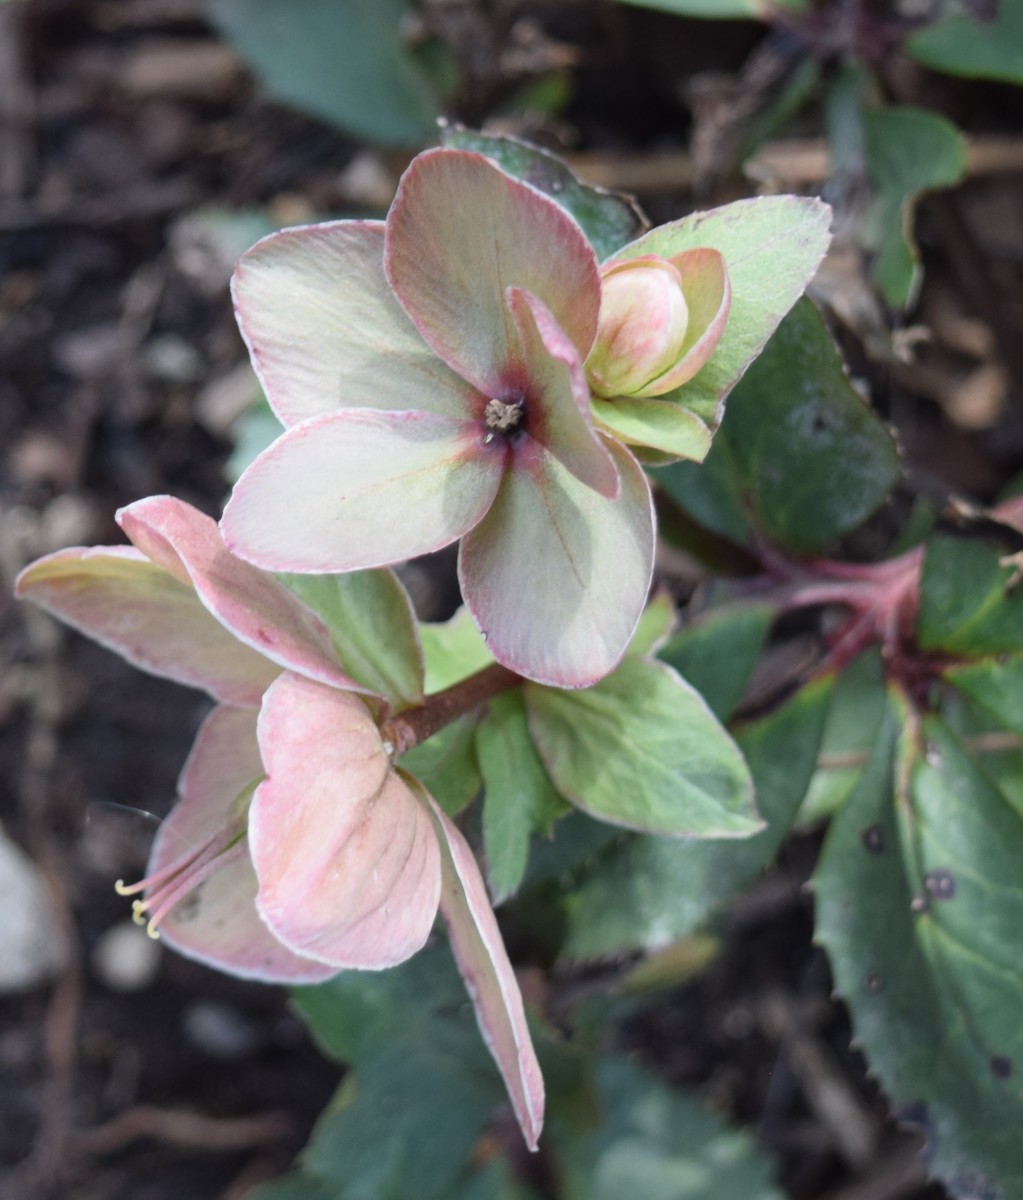 Hellebore flowers are early bloomers.